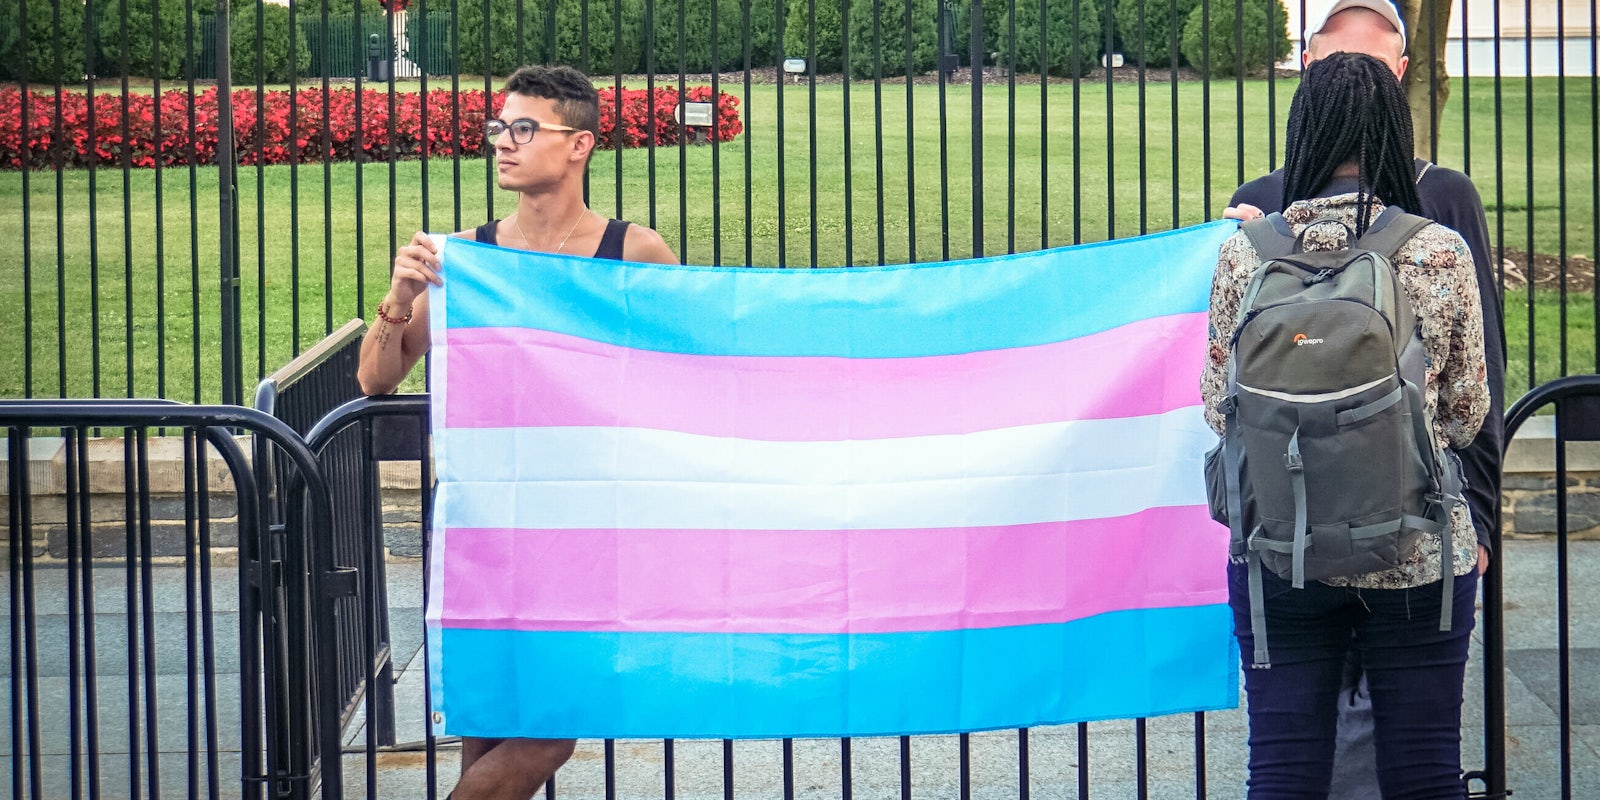 Trans activists protest the Trump administration's trans military ban announcement.